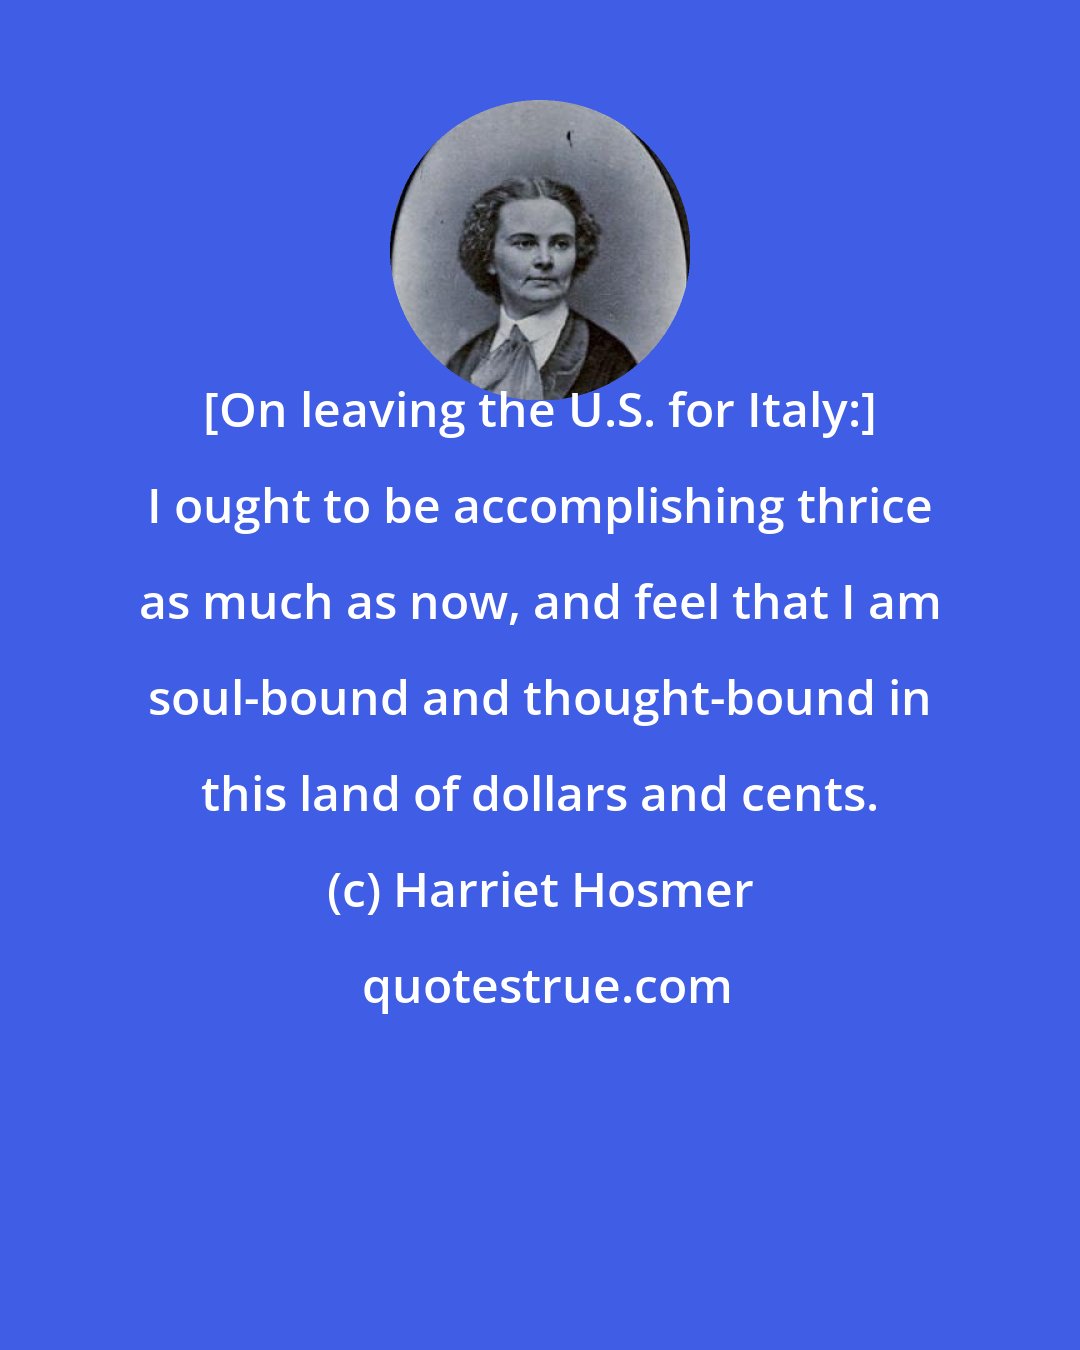 Harriet Hosmer: [On leaving the U.S. for Italy:] I ought to be accomplishing thrice as much as now, and feel that I am soul-bound and thought-bound in this land of dollars and cents.